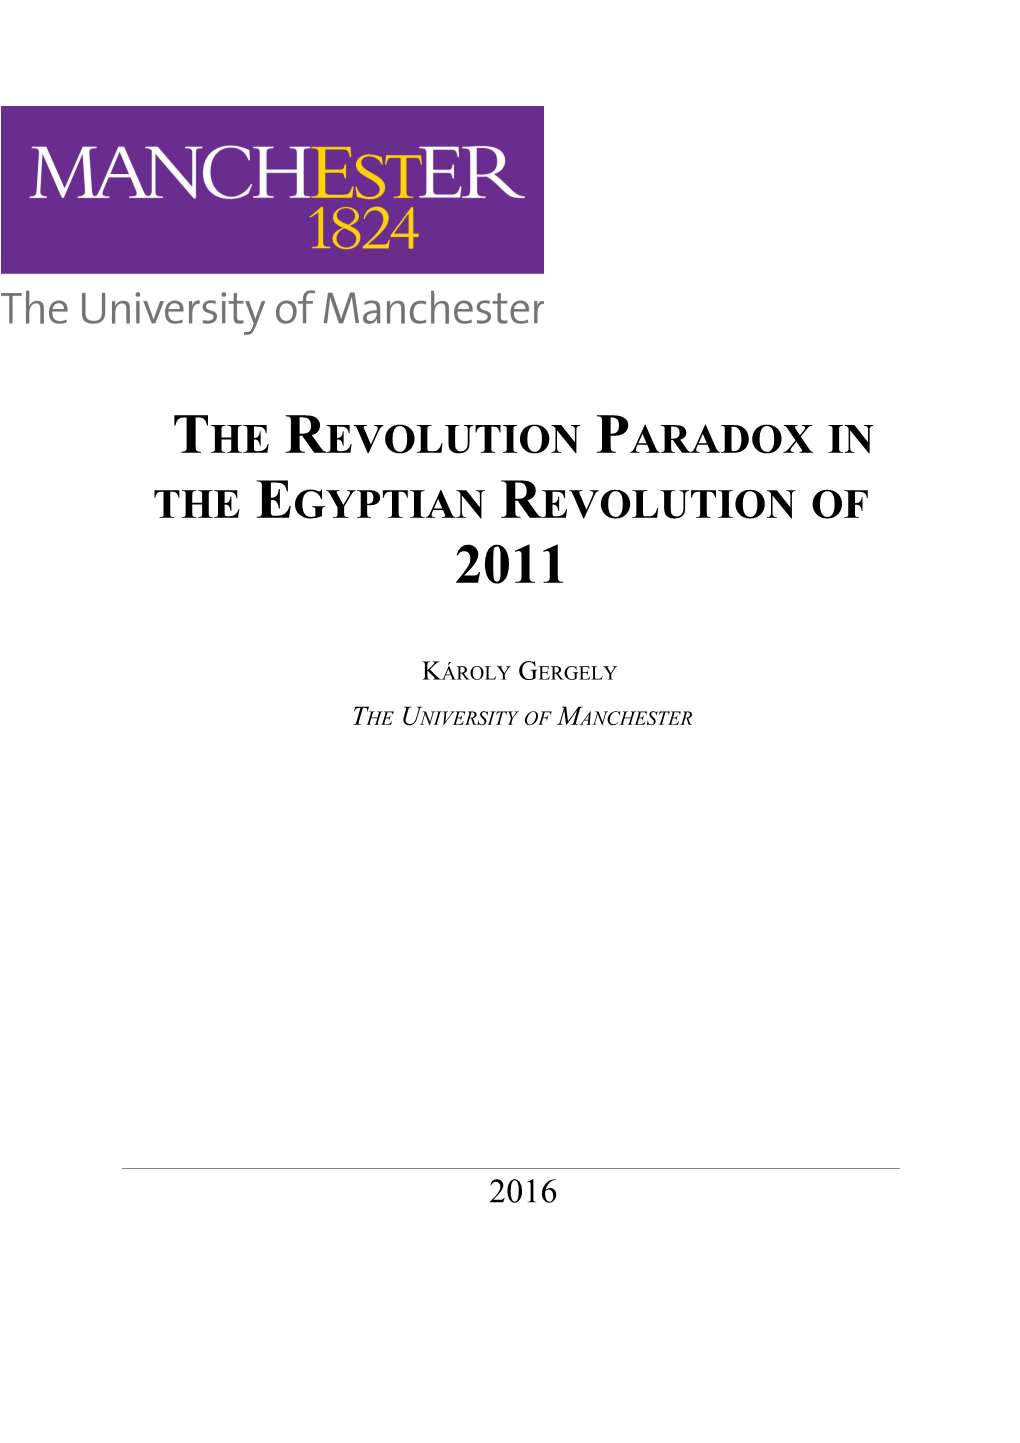 The Revolution Paradox in the Egyptian Revolution of 2011